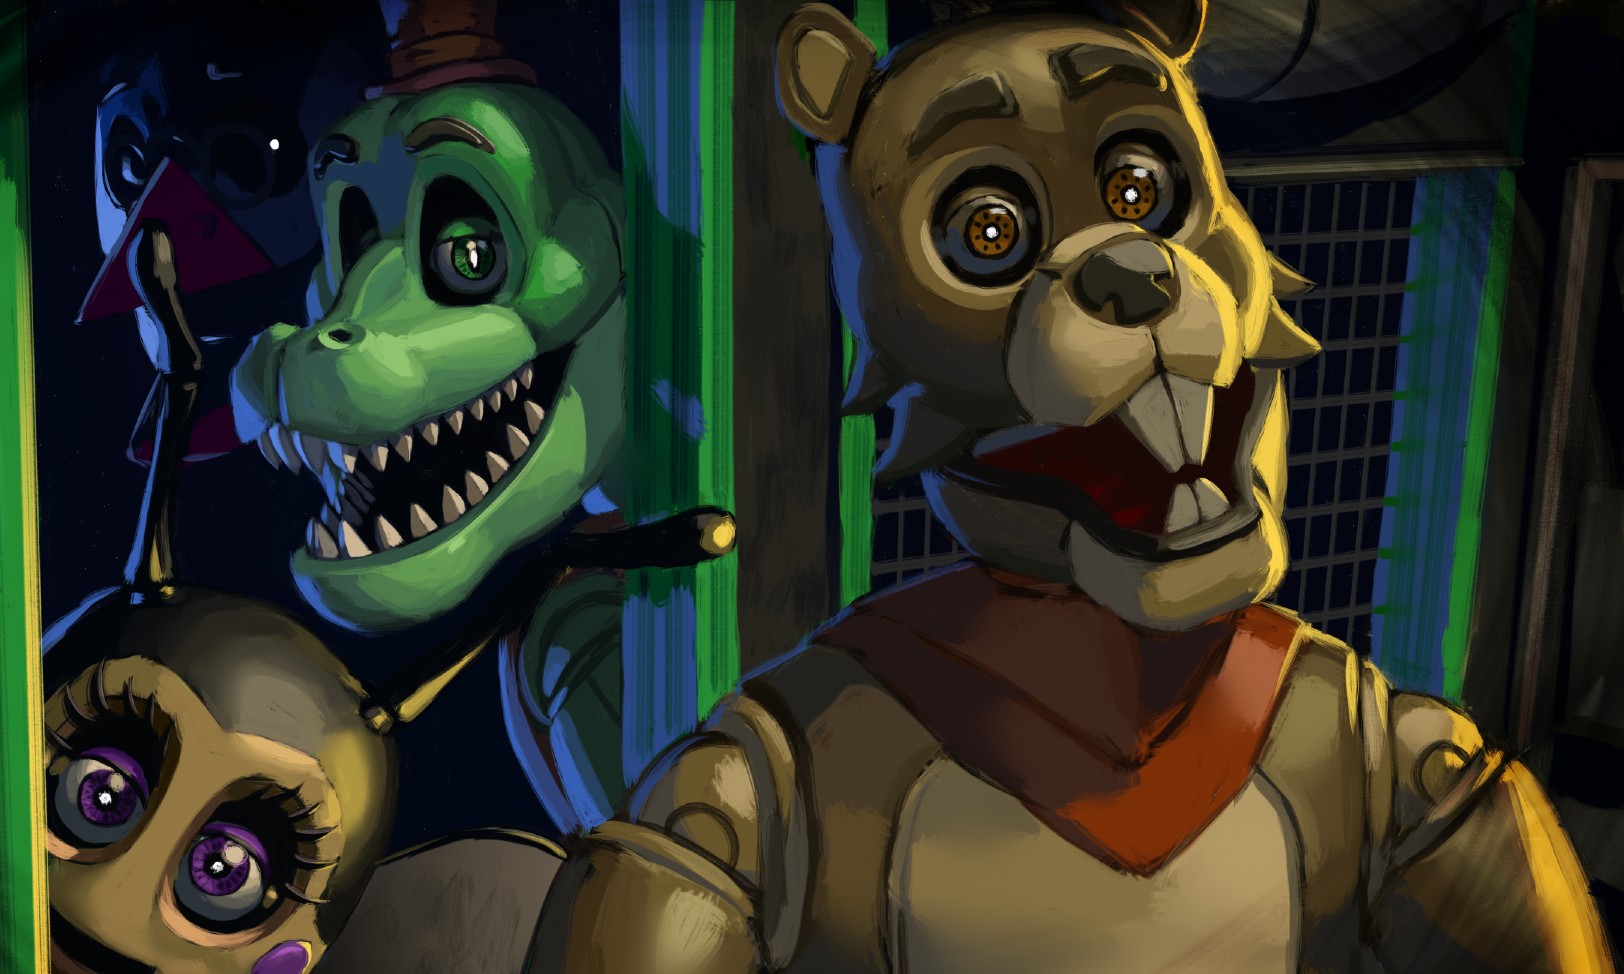 Five Nights At Freddy’s (FNAF) Games In Order: Release Date & Chronological Guide